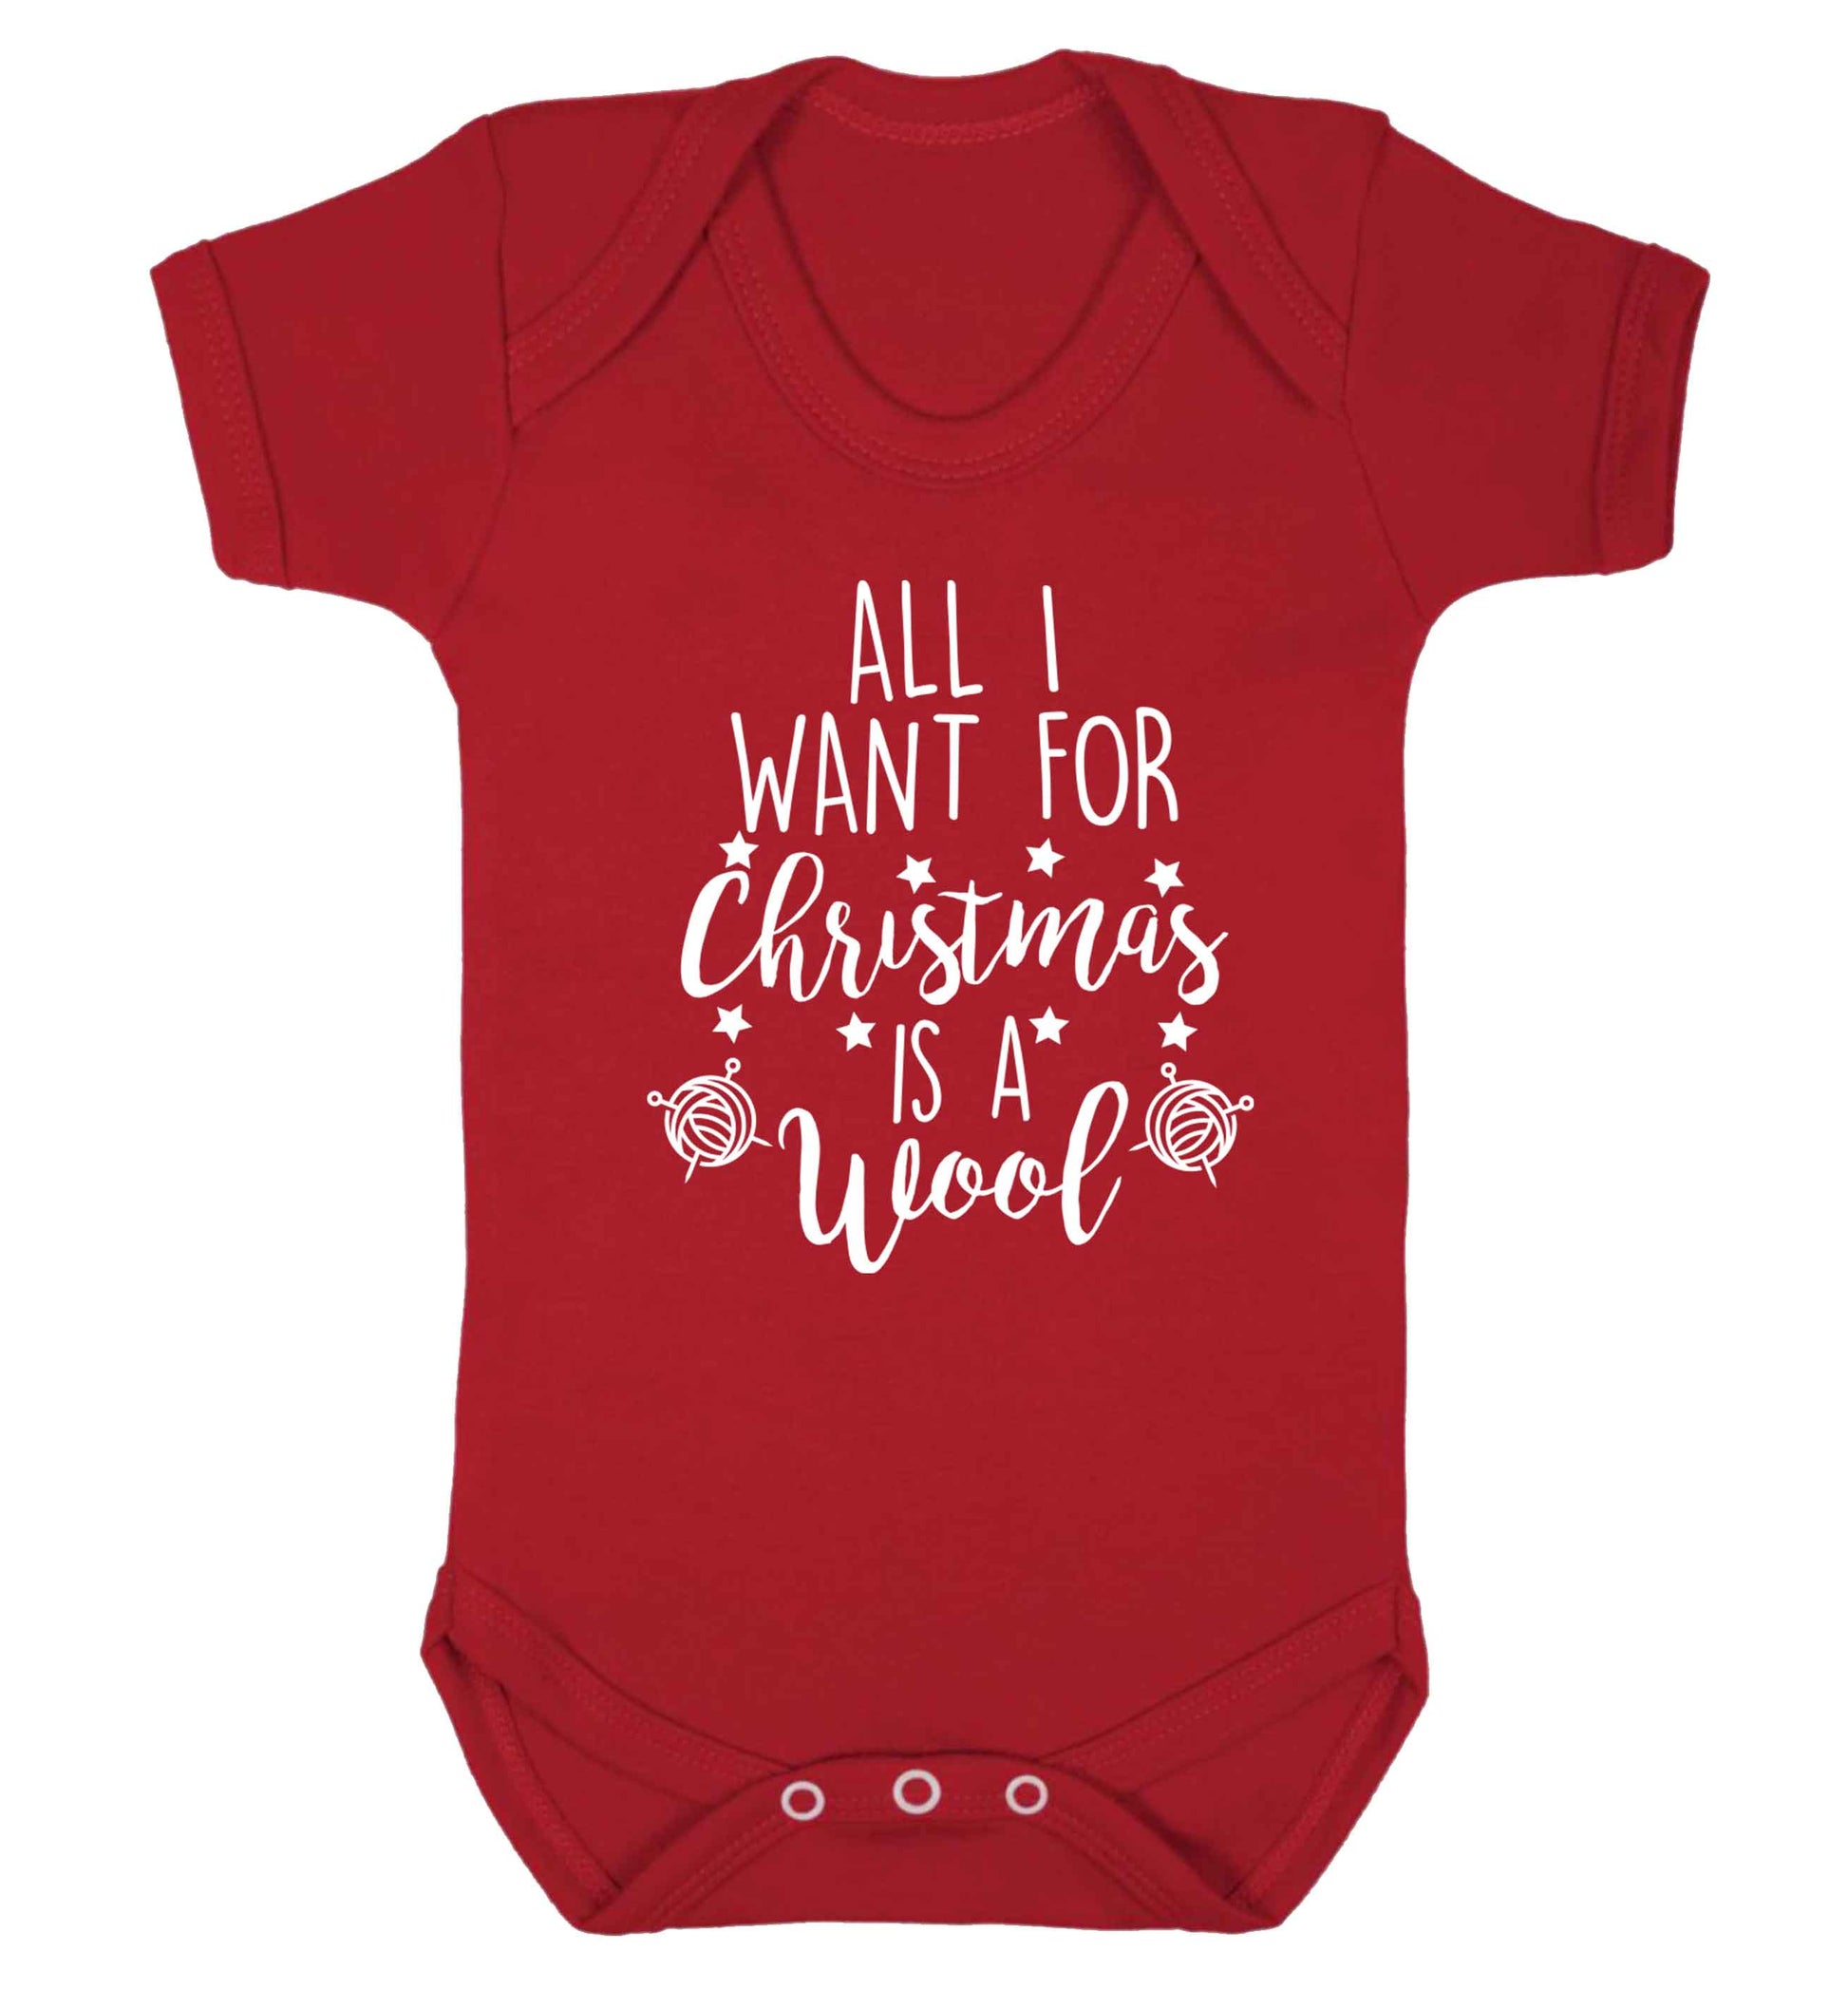 All I want for Christmas is wool! Baby Vest red 18-24 months